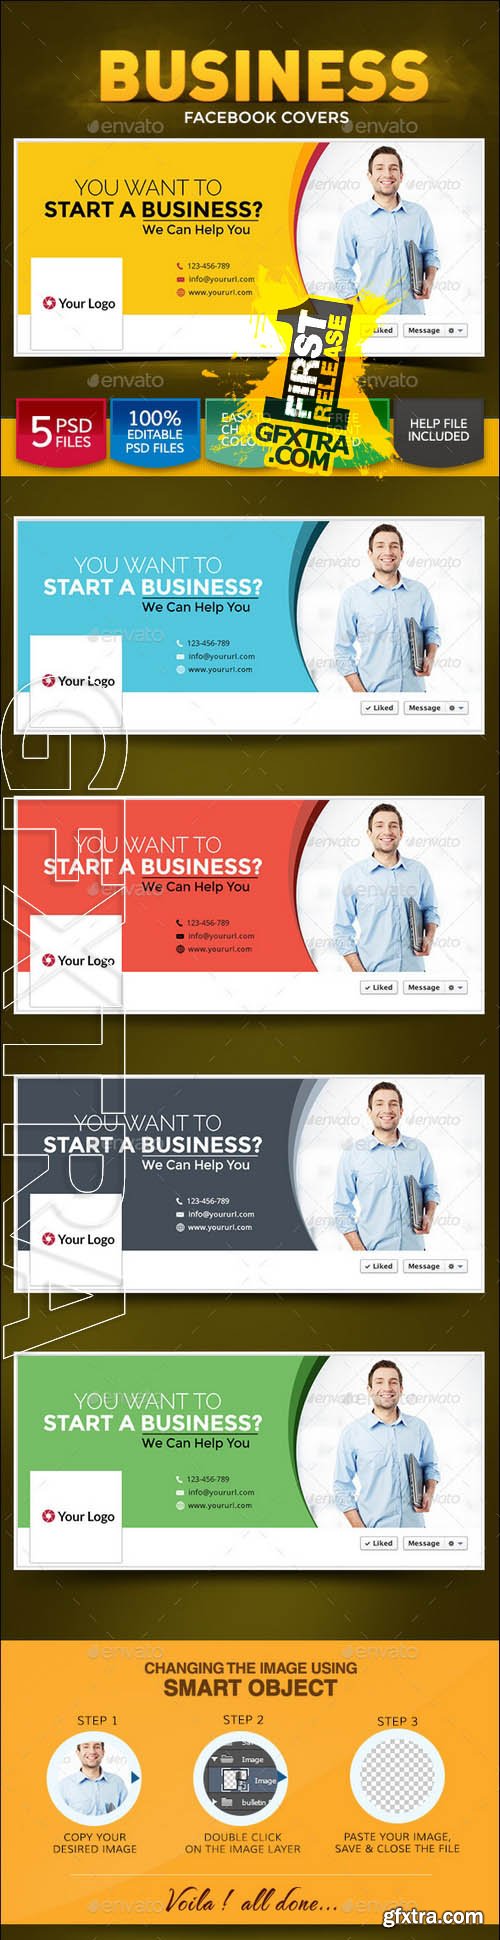 Business Facebook Covers - Graphicriver 8988855